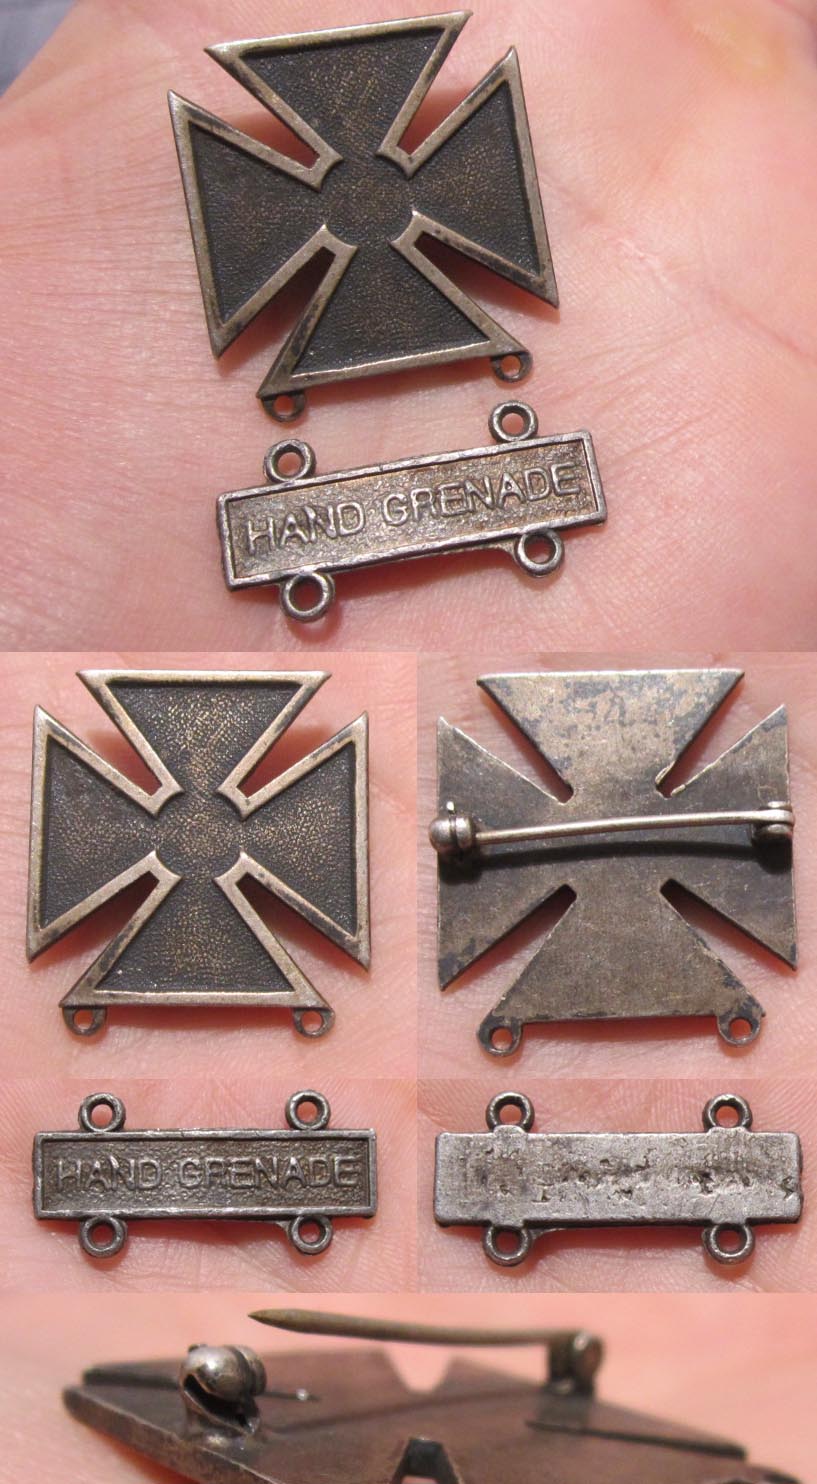 US Army Marksman Badge with Hand Grenade Clasp